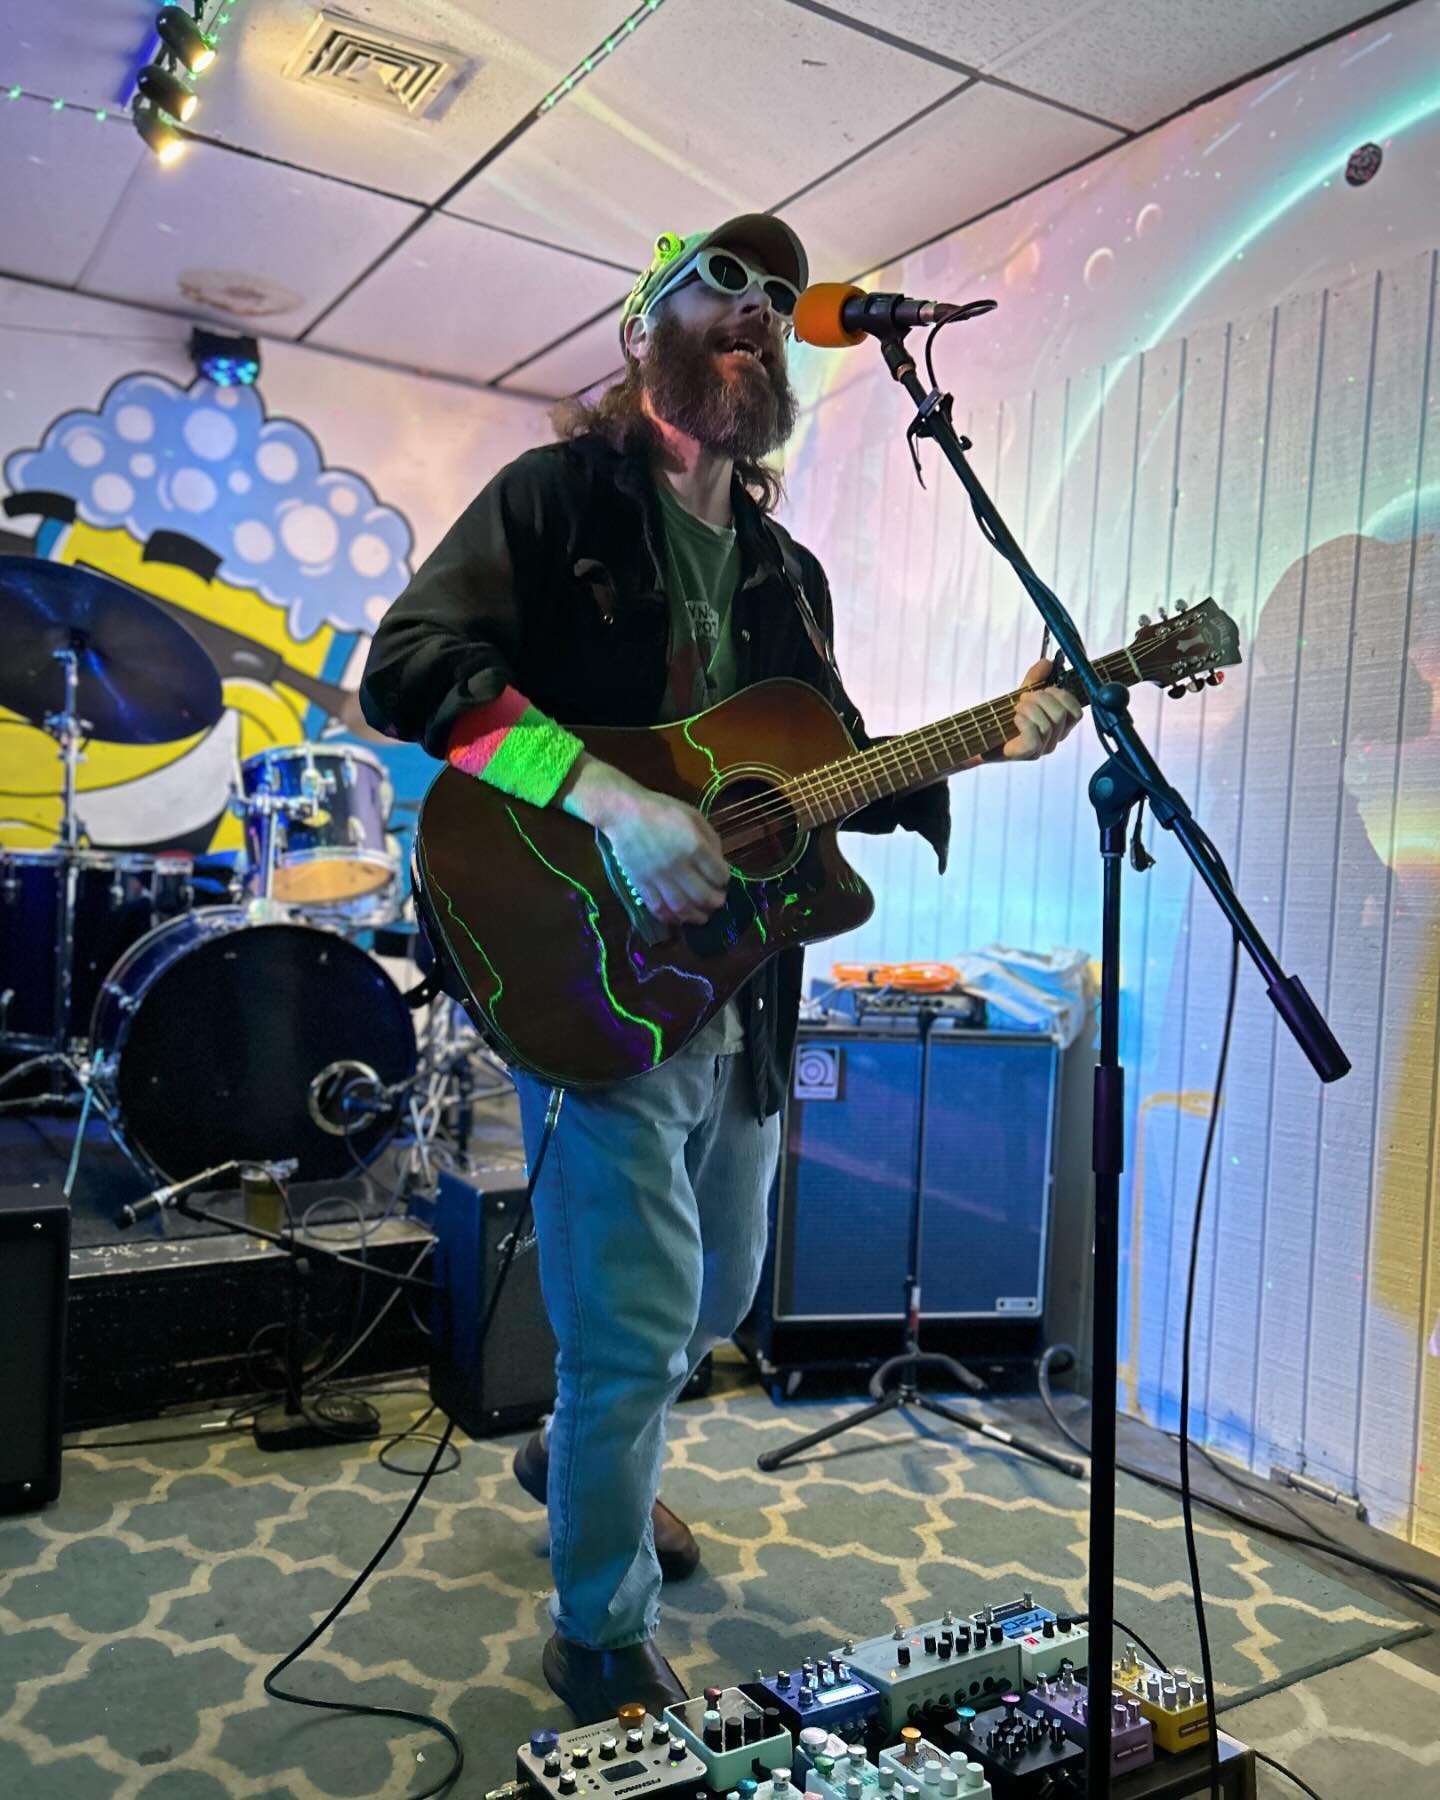 Hey now! Thank you to all of the fine folks who were present and accounted for at my doubleheader on 4/20 at @whbbrewingco and @mrbeerysbethpage There&rsquo;s nothing better than getting to play music for the people and getting to do it twice in one 